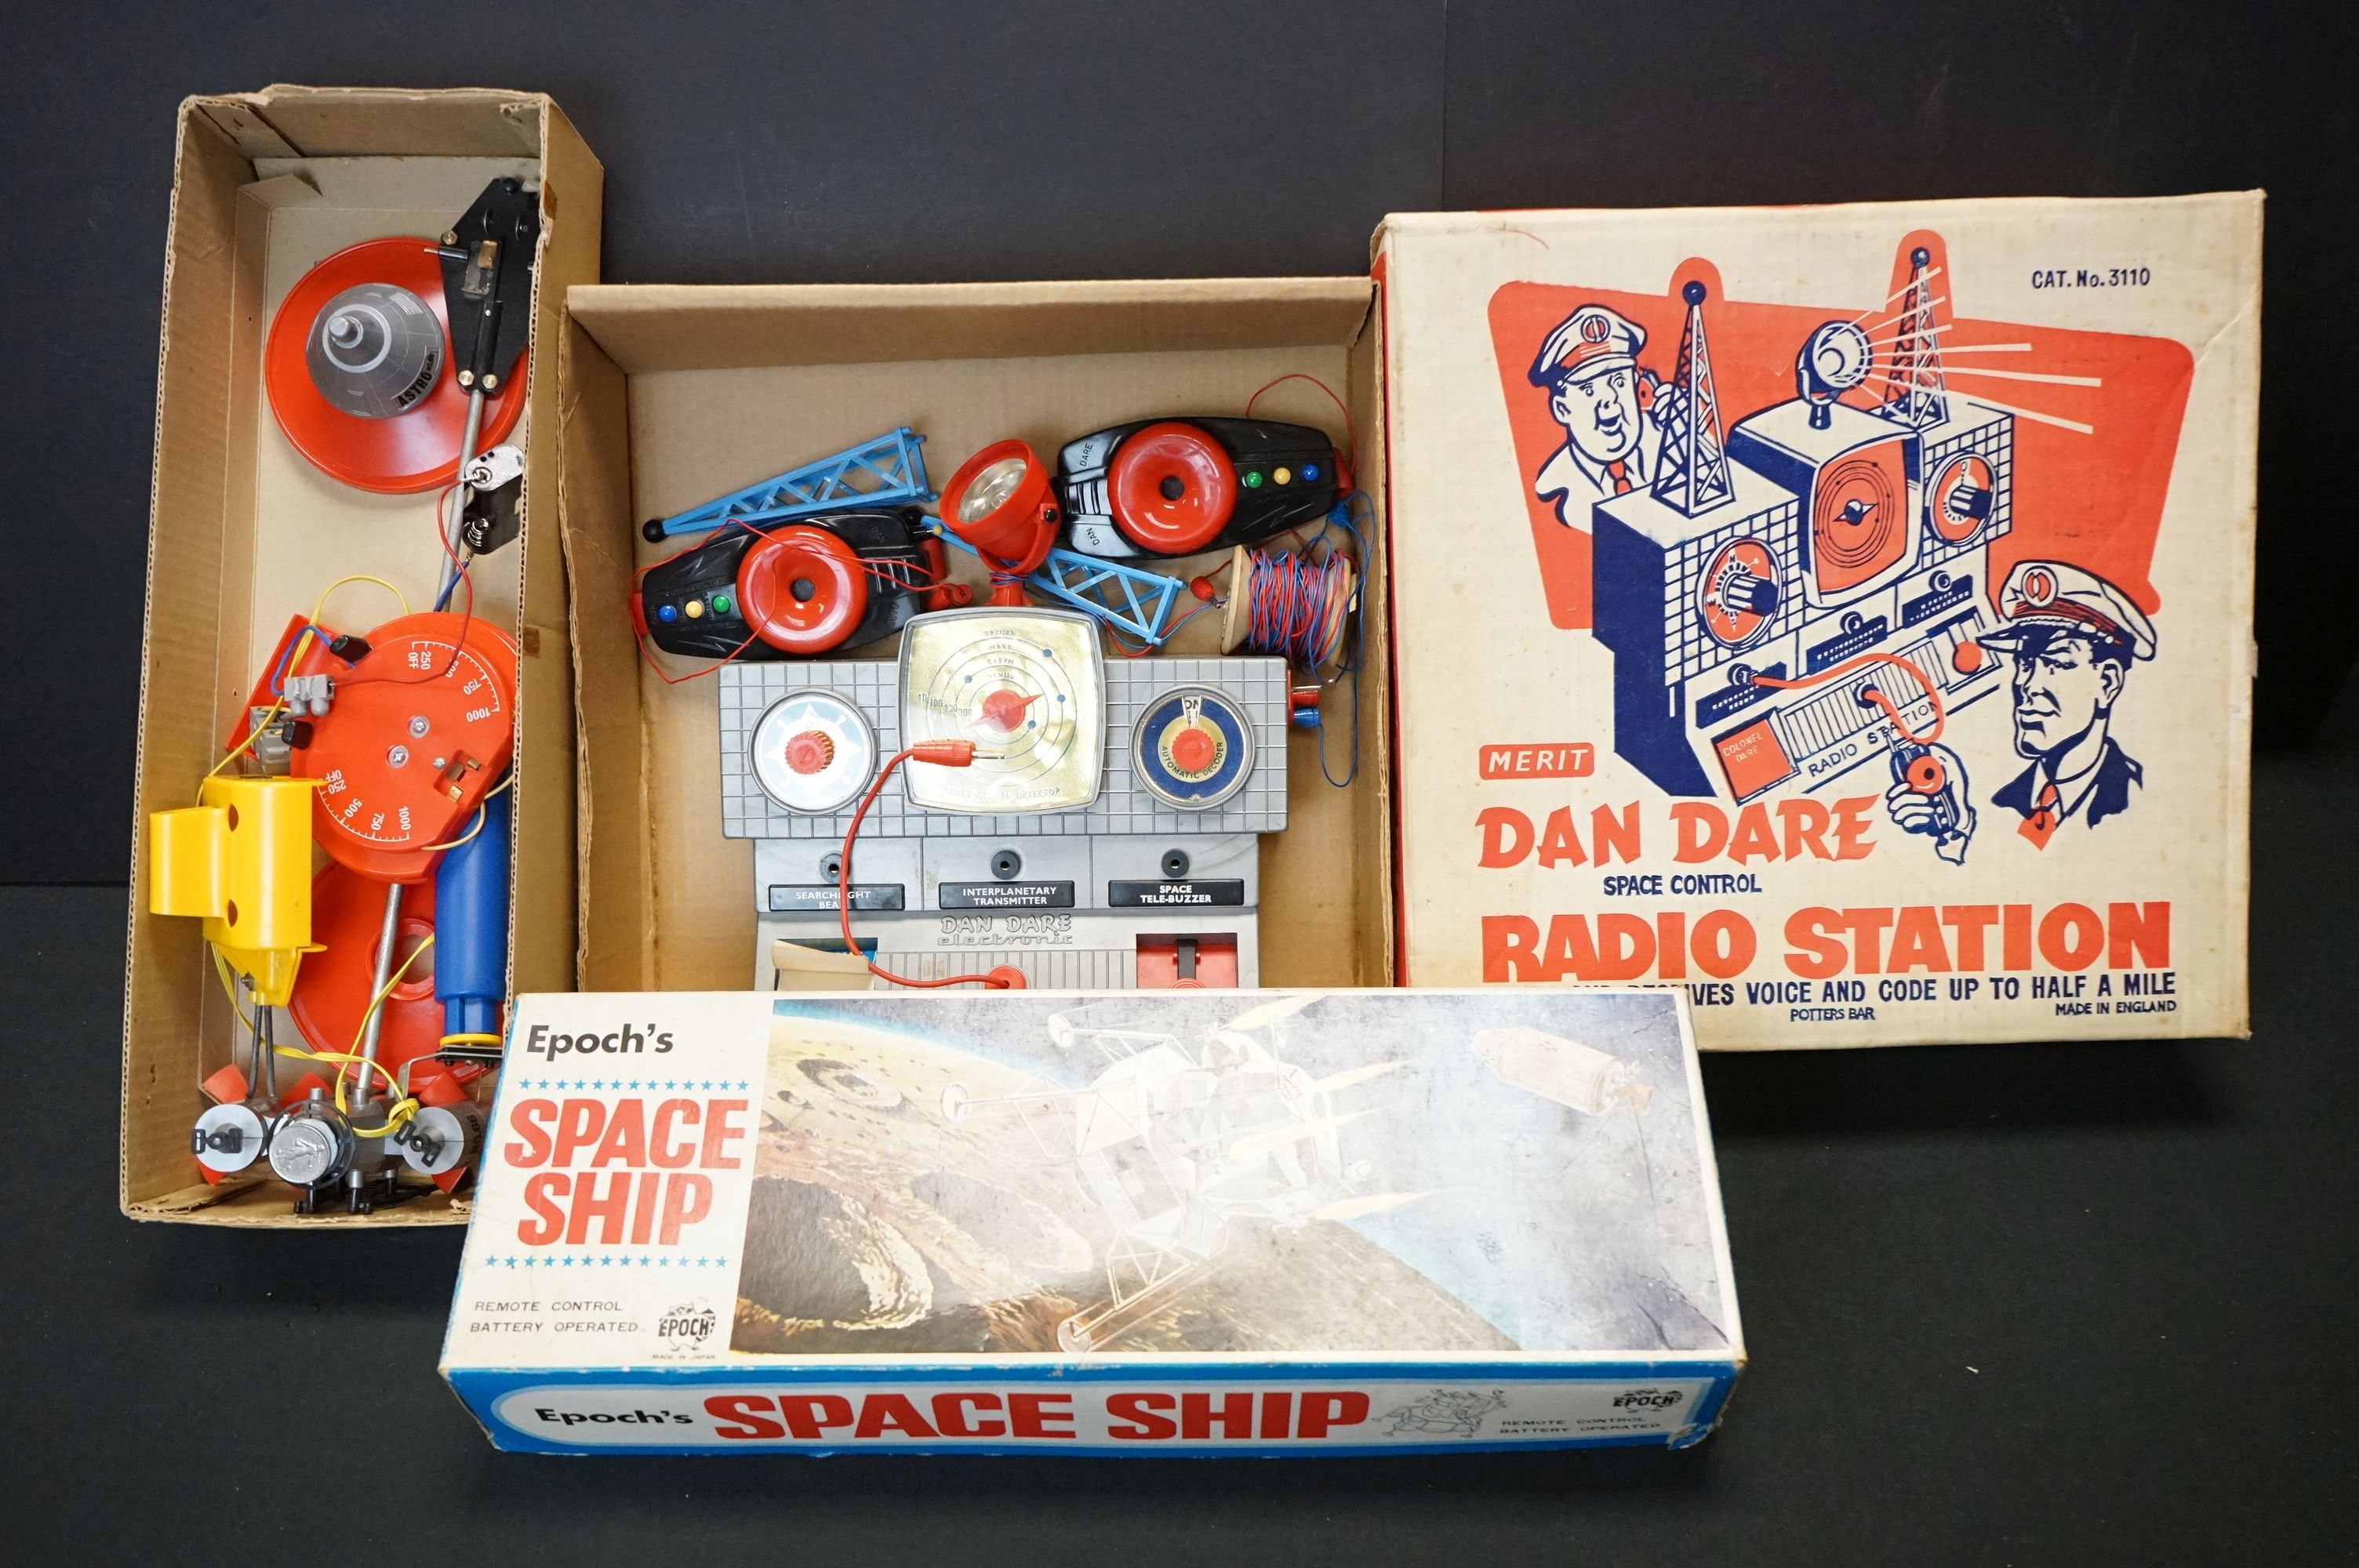 Boxed Merit Dan Dare Space Control Radio Station, no. 3110, contents appear gd other than missing